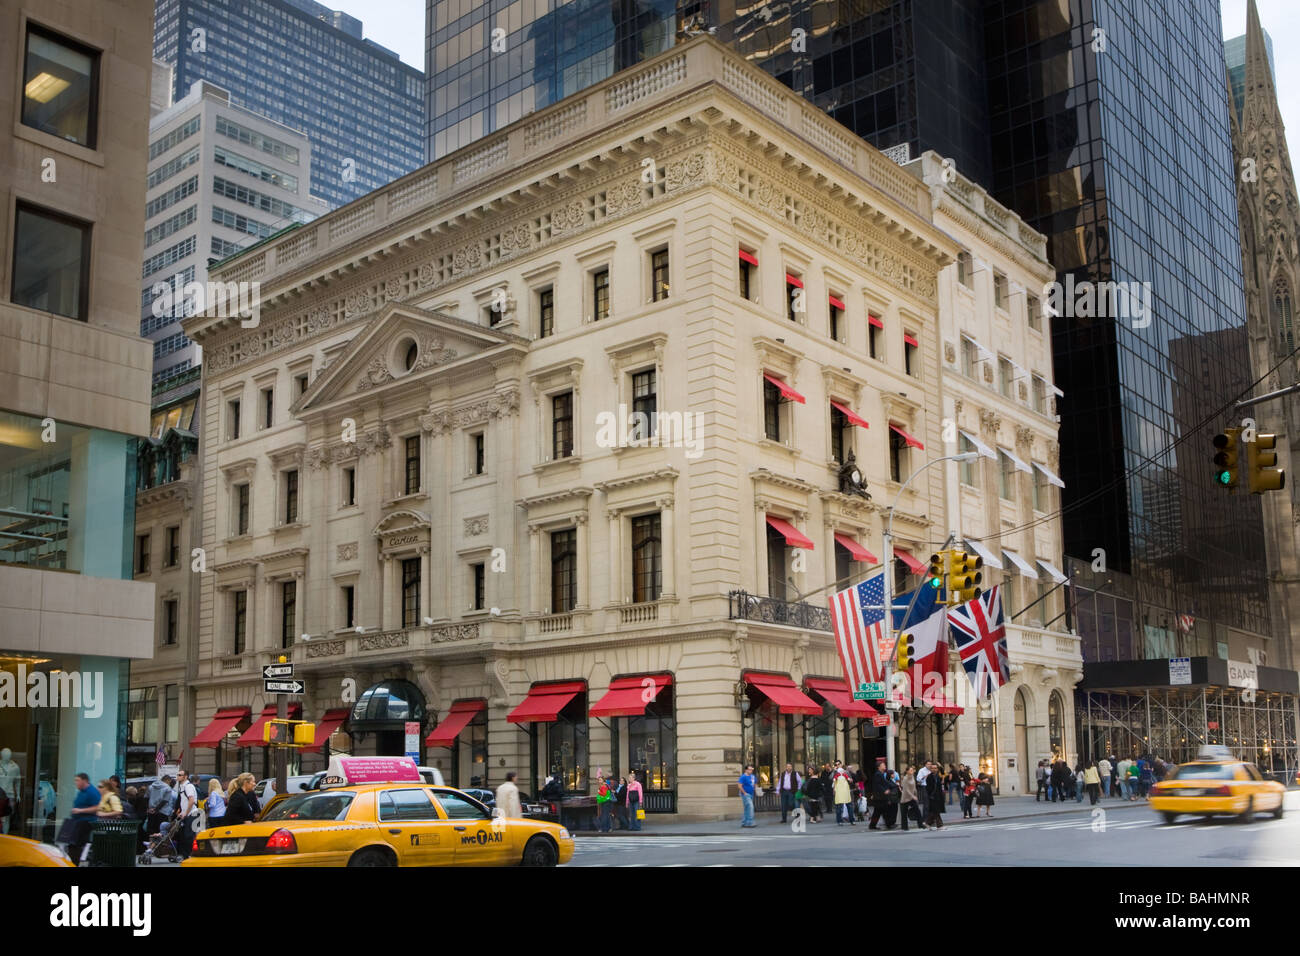 Cartier Fifth Avenue Mansion: fine jewelry, watches, accessories at 653  Fifth Avenue - Cartier